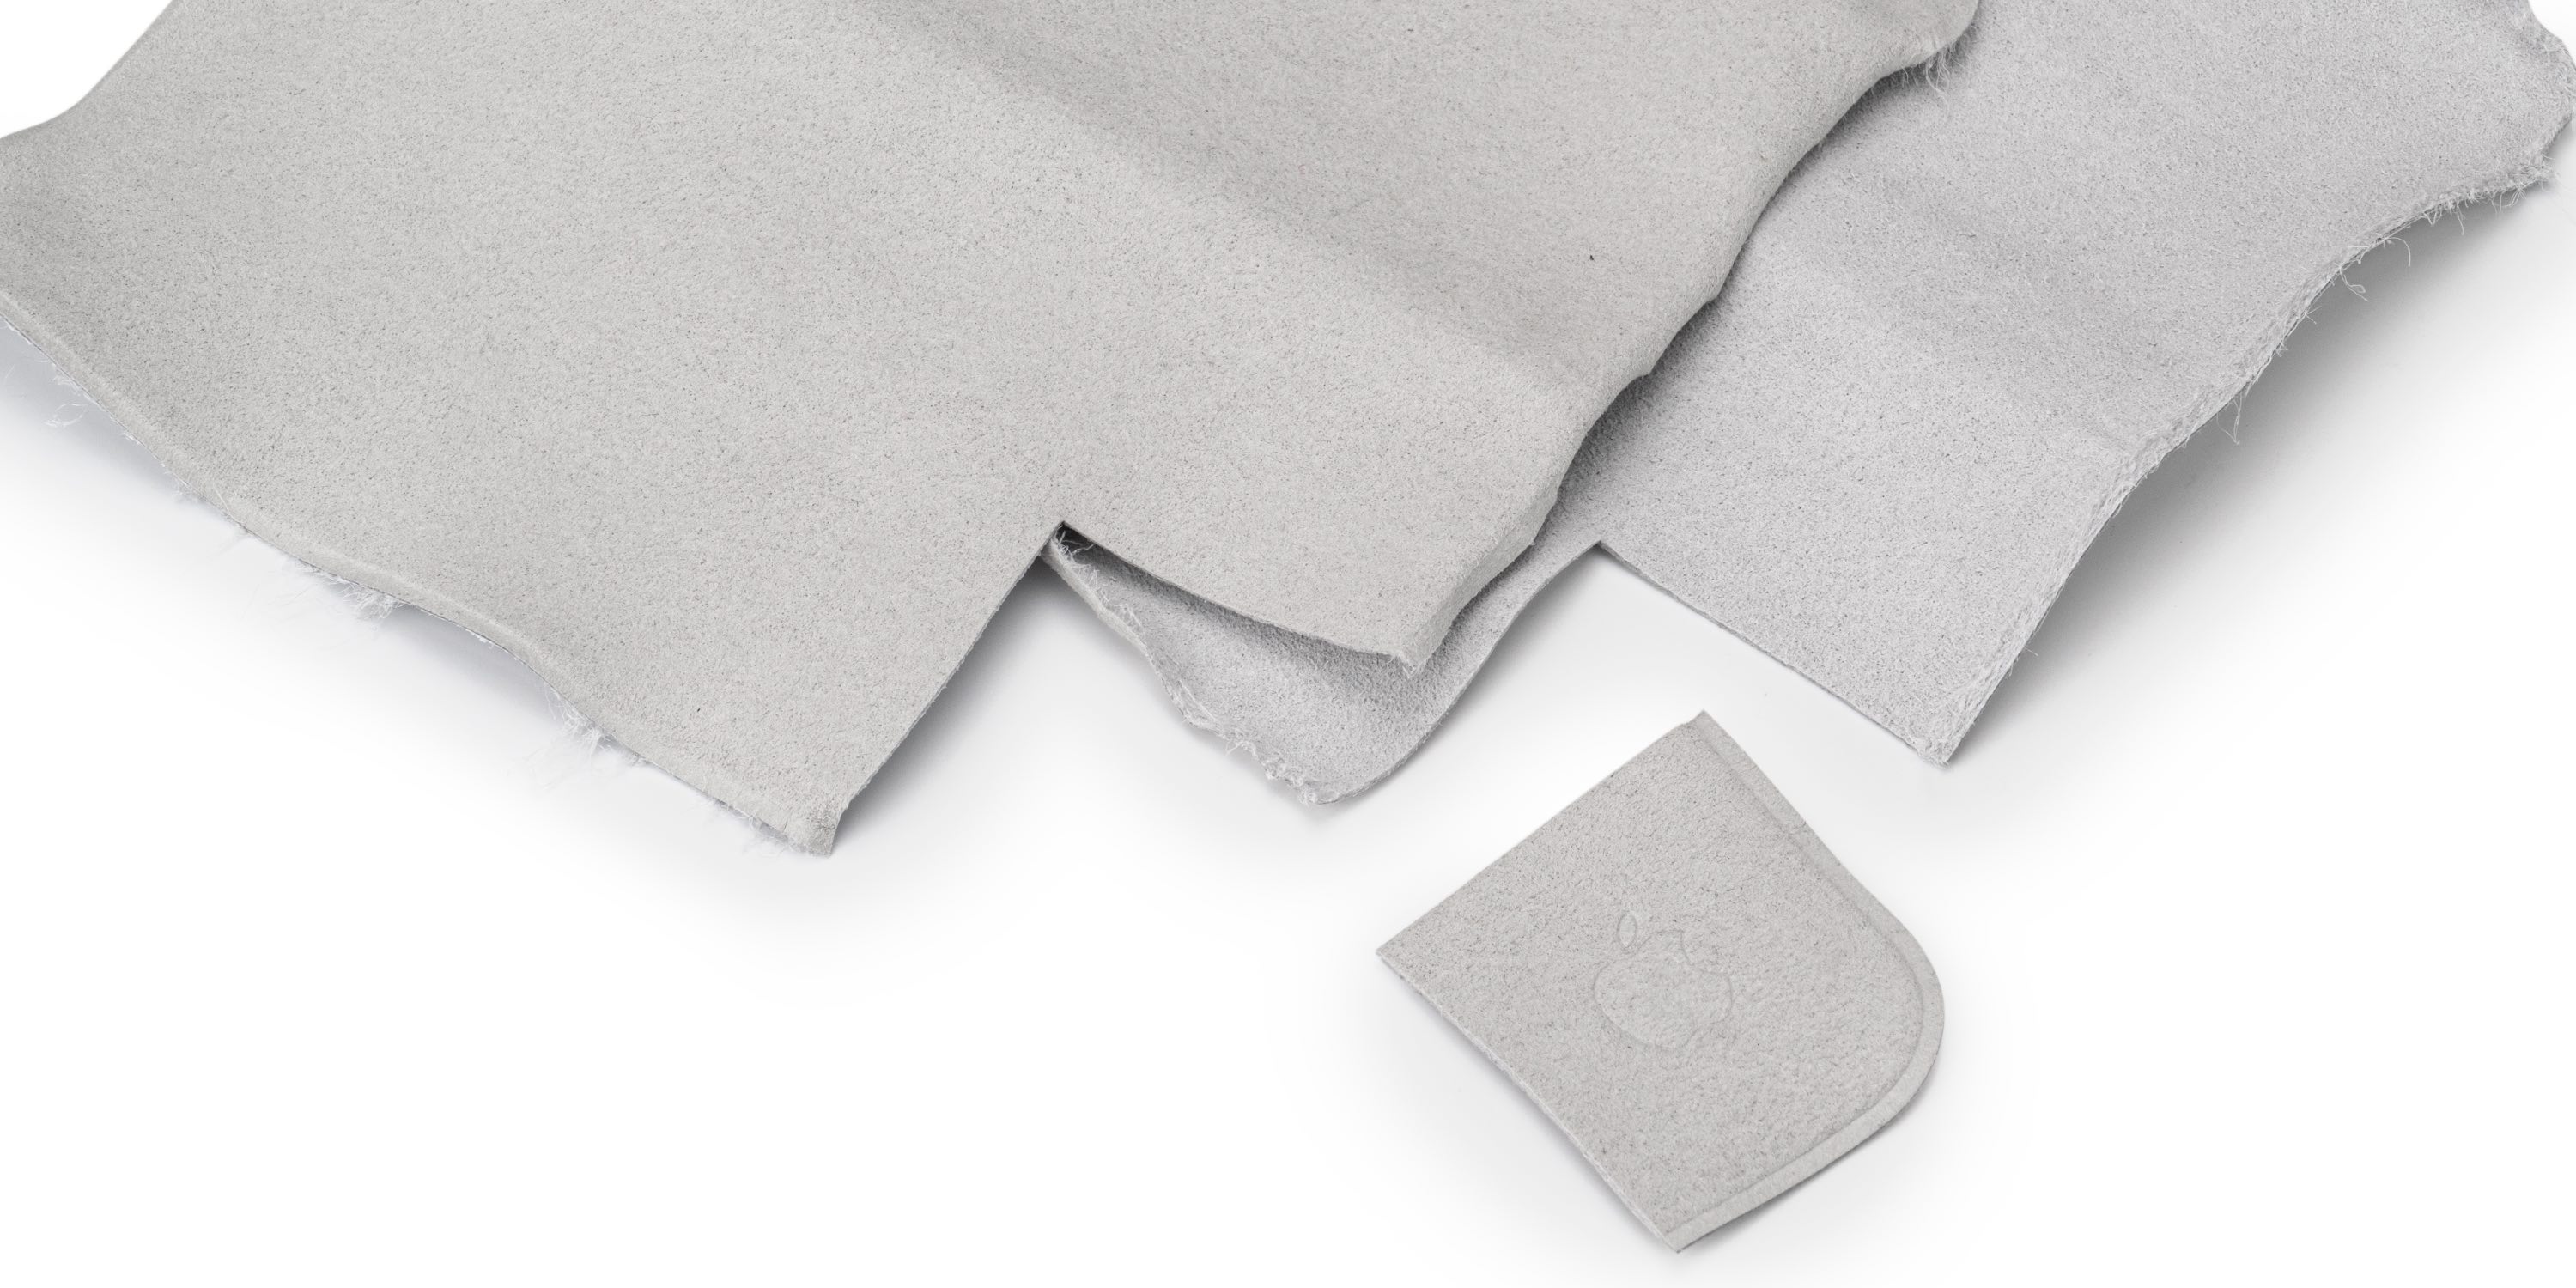 How did we ever clean our tech without Apple's new $19 polishing cloth?